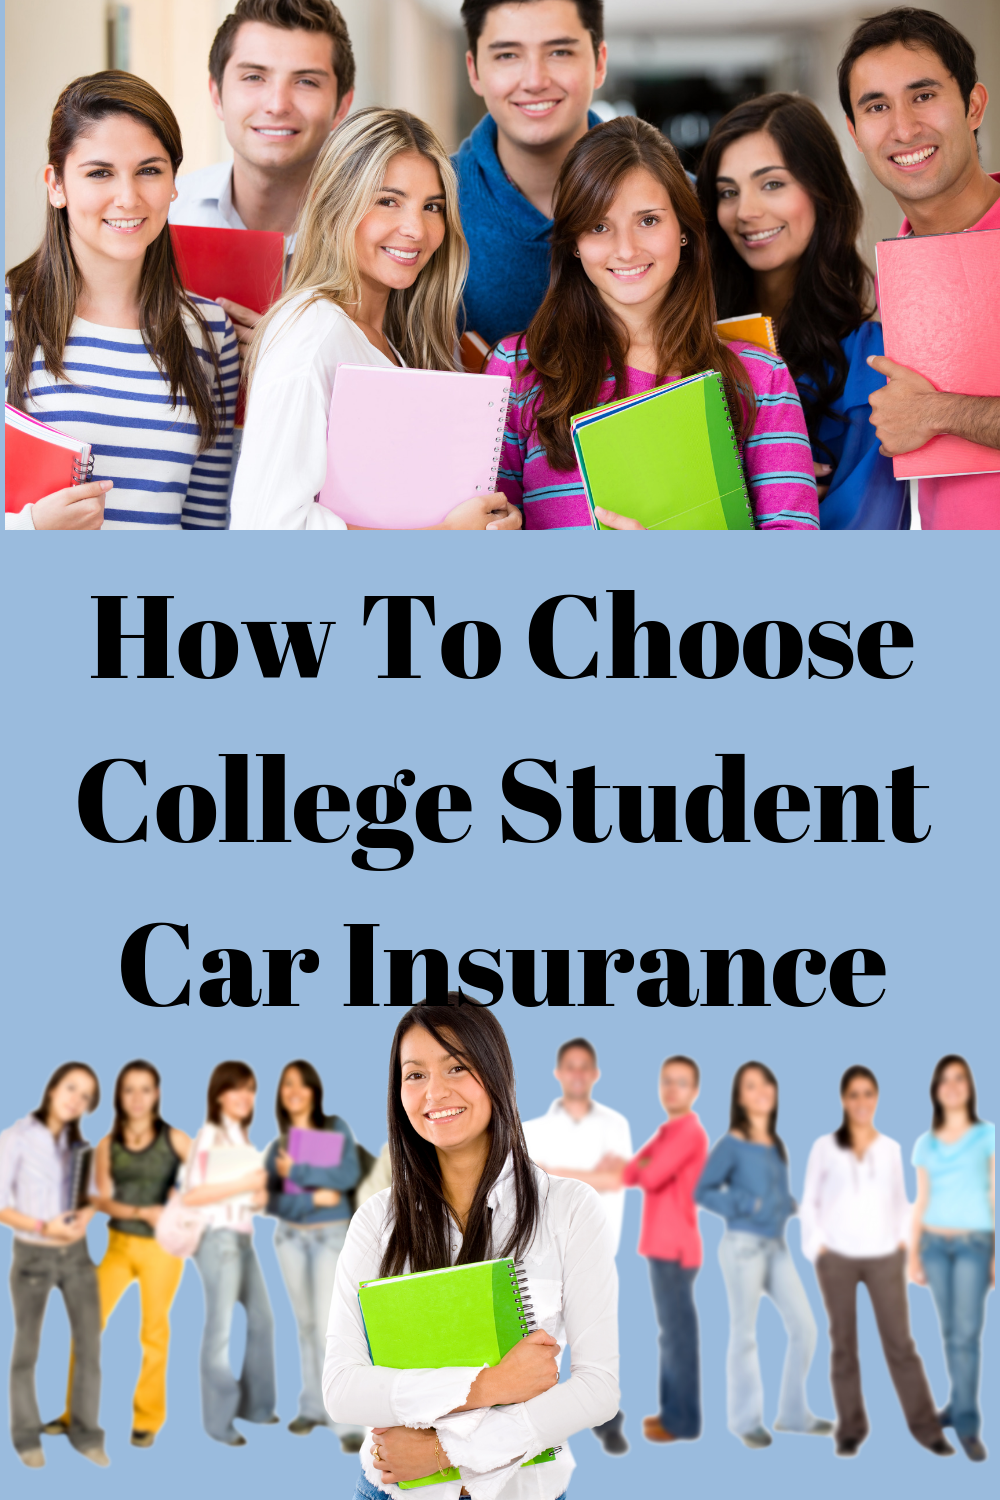 Common Myths About Student Car Insurance